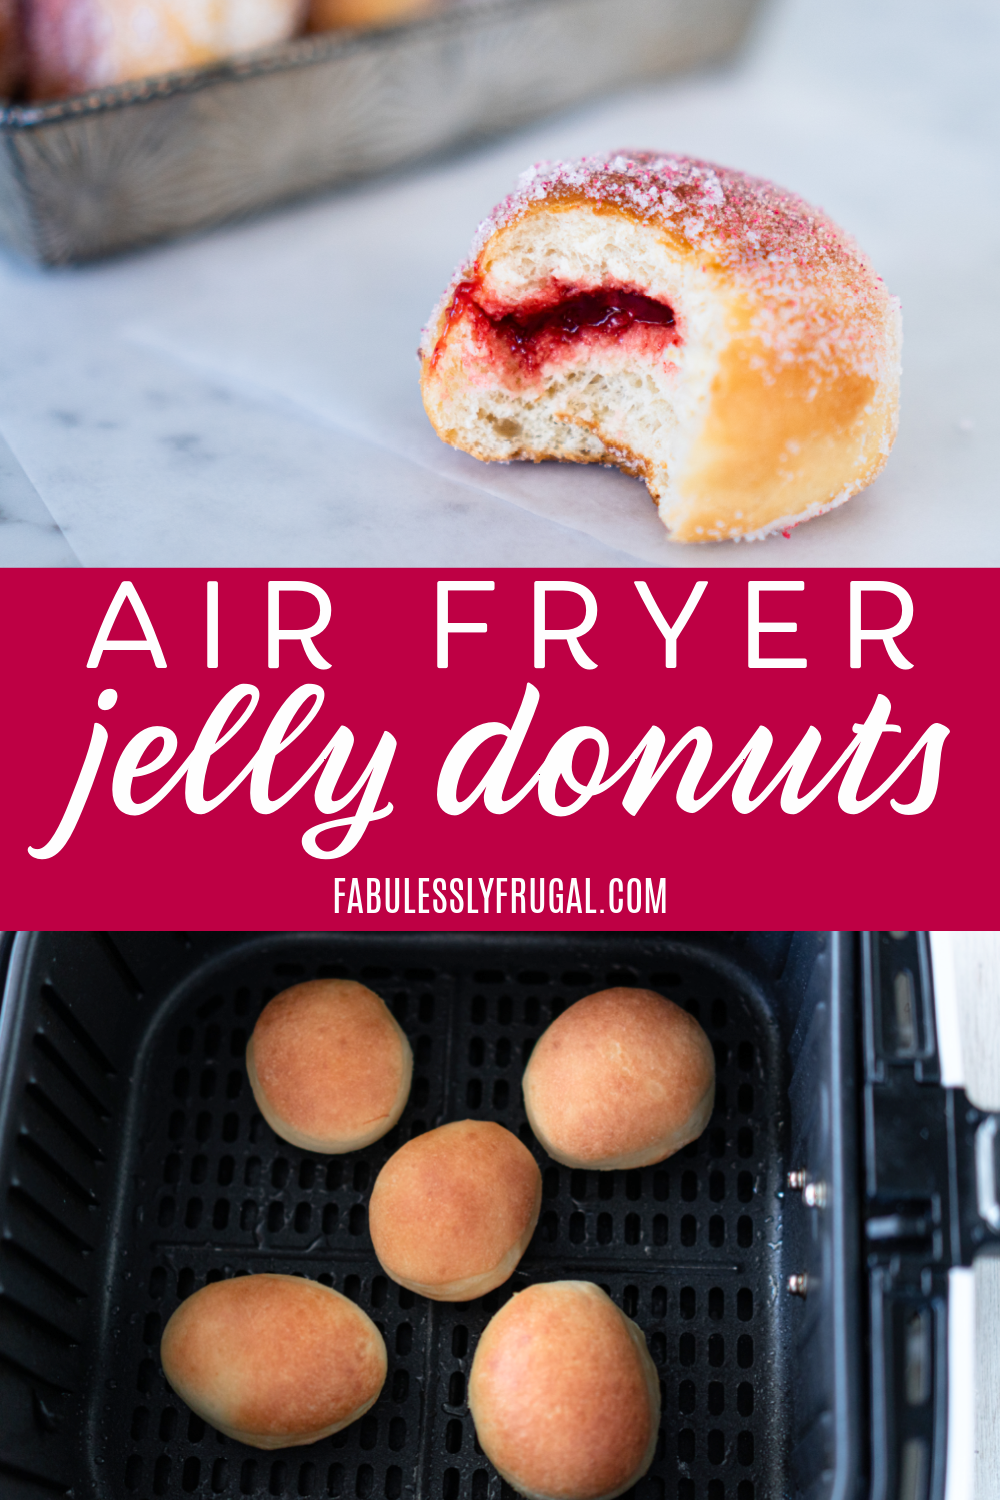 Creamy, tasty, and simple cream filled air fryer donuts are the best air fryer dessert!